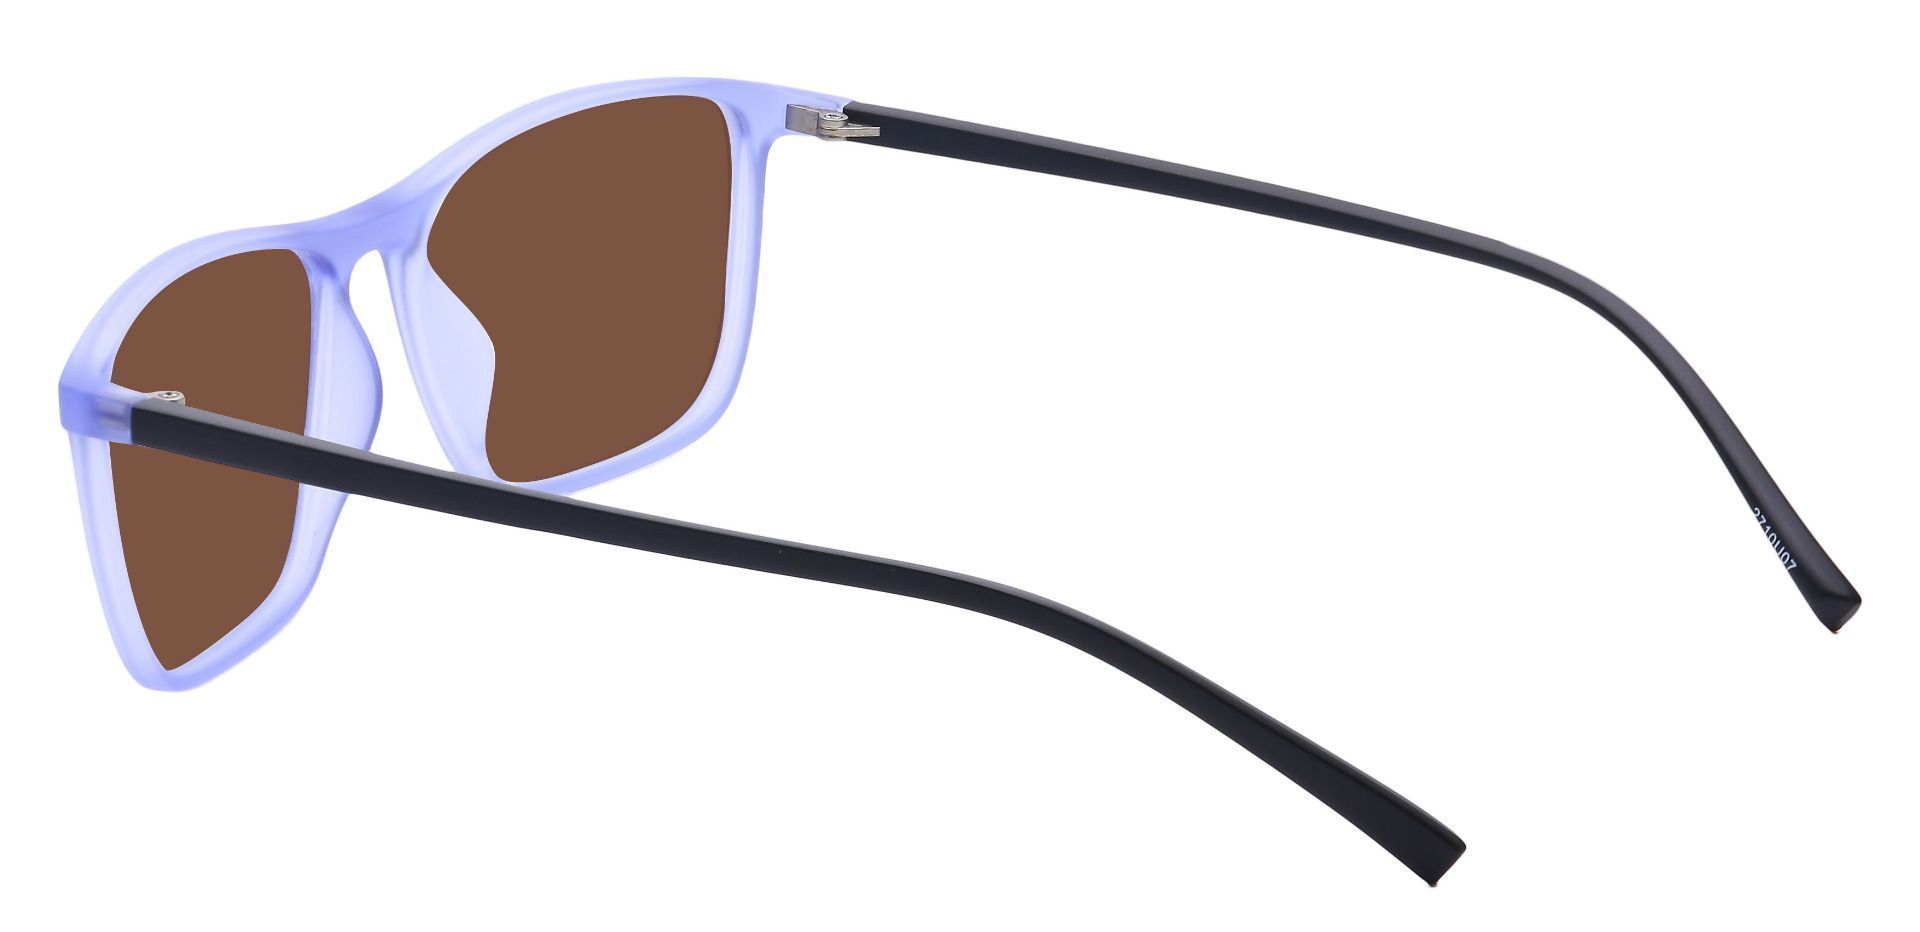 Candid Rectangle Reading Sunglasses - Blue Frame With Brown Lenses